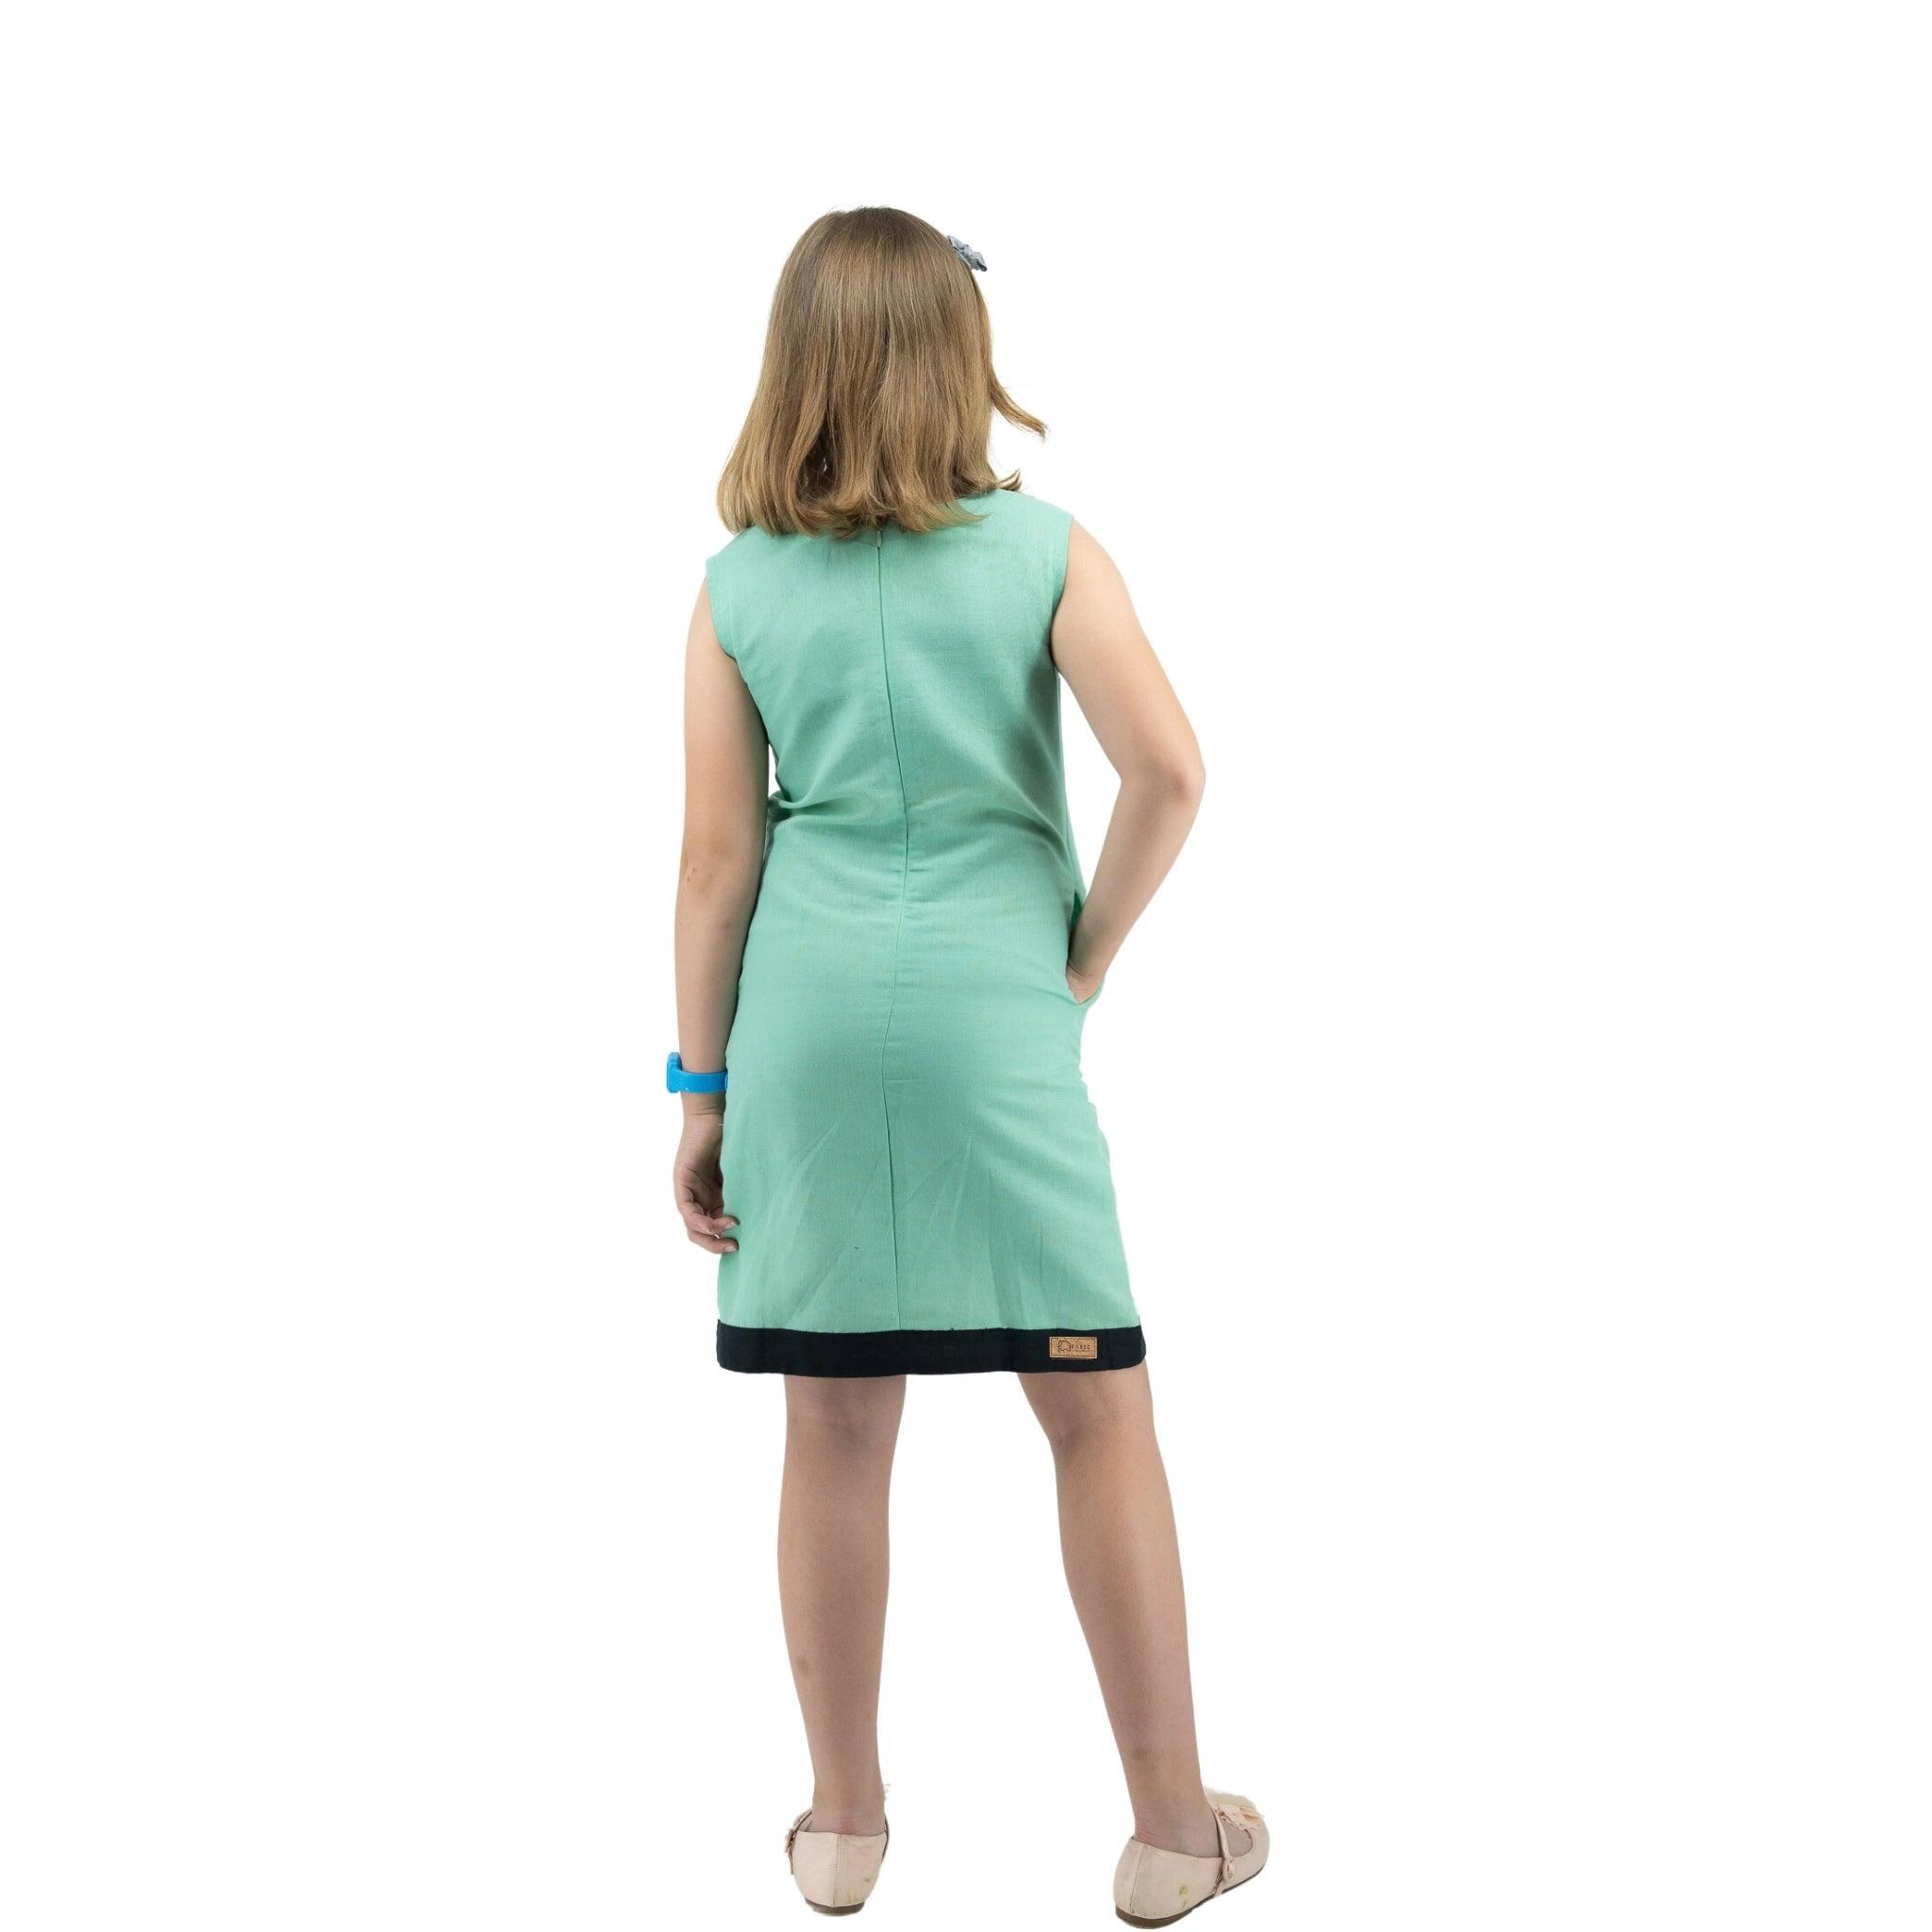 A woman in a Karee Neptune green Linen Cotton Round Neck Frock for Kids standing with her back to the camera against a white background.